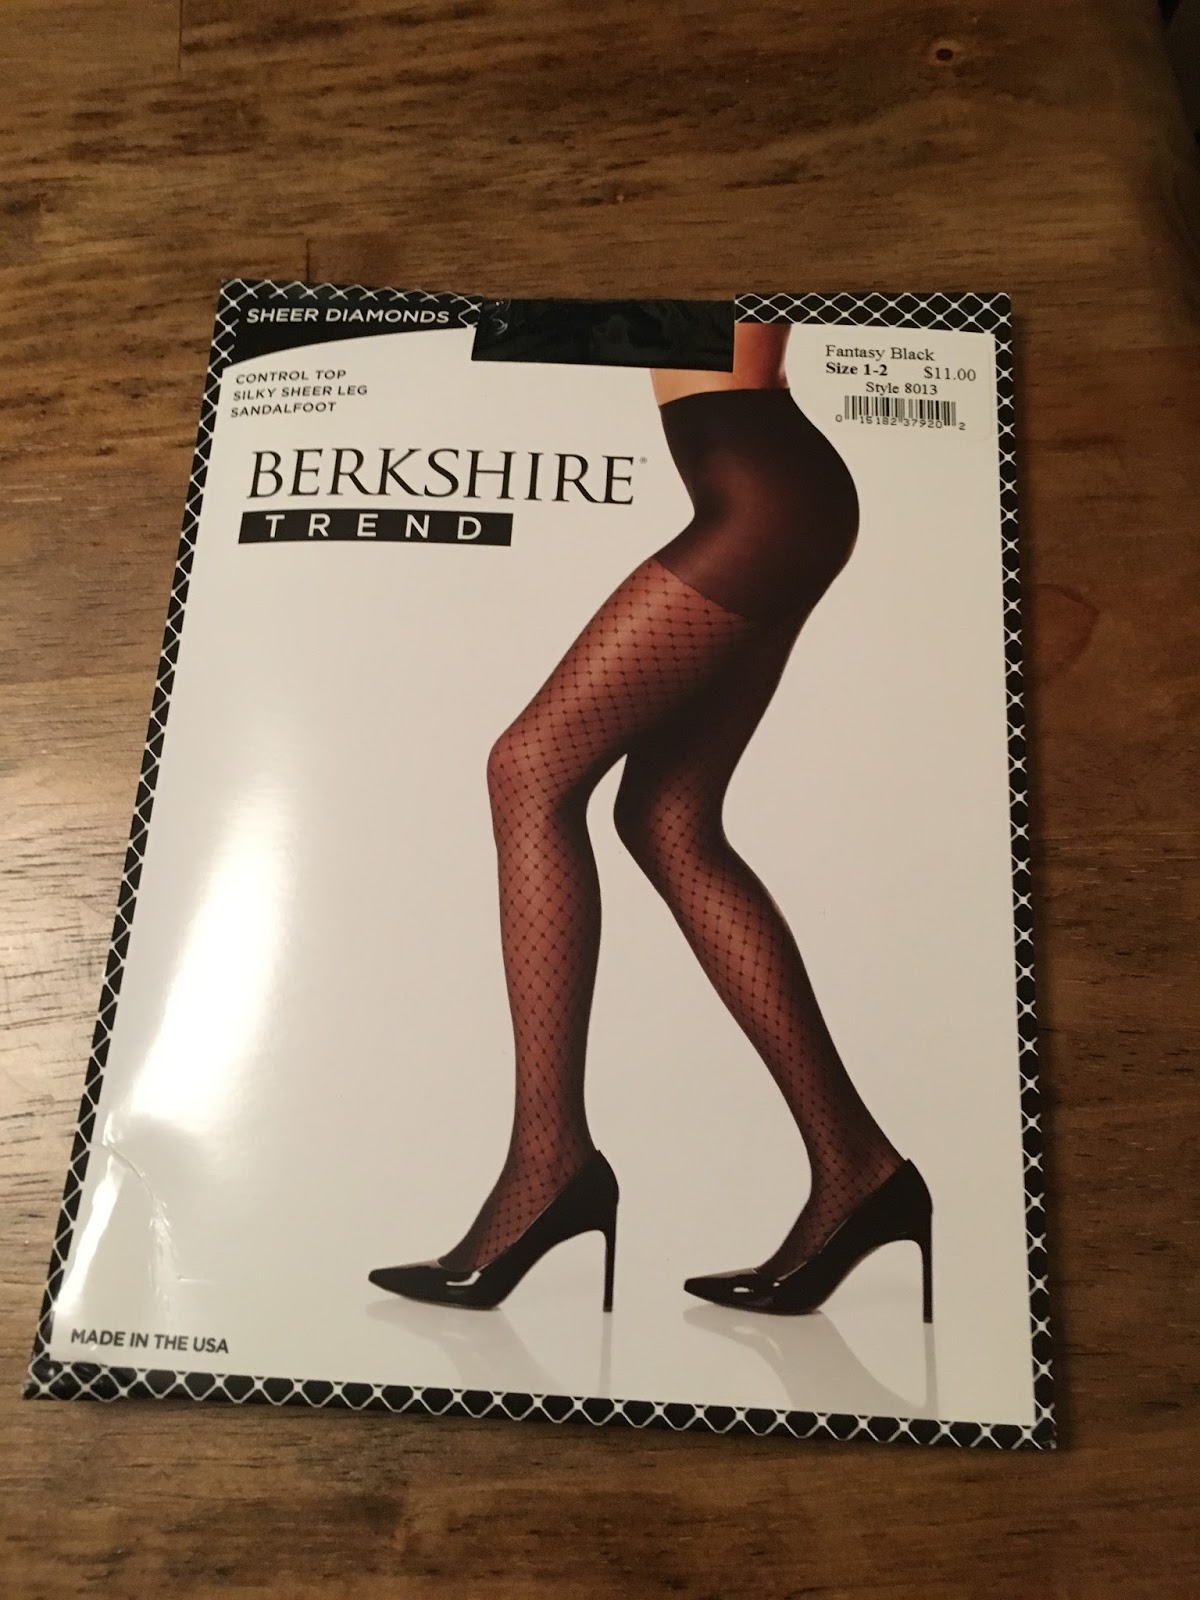 Plus Size Berkshire All Day Sheers Control Top Pantyhose